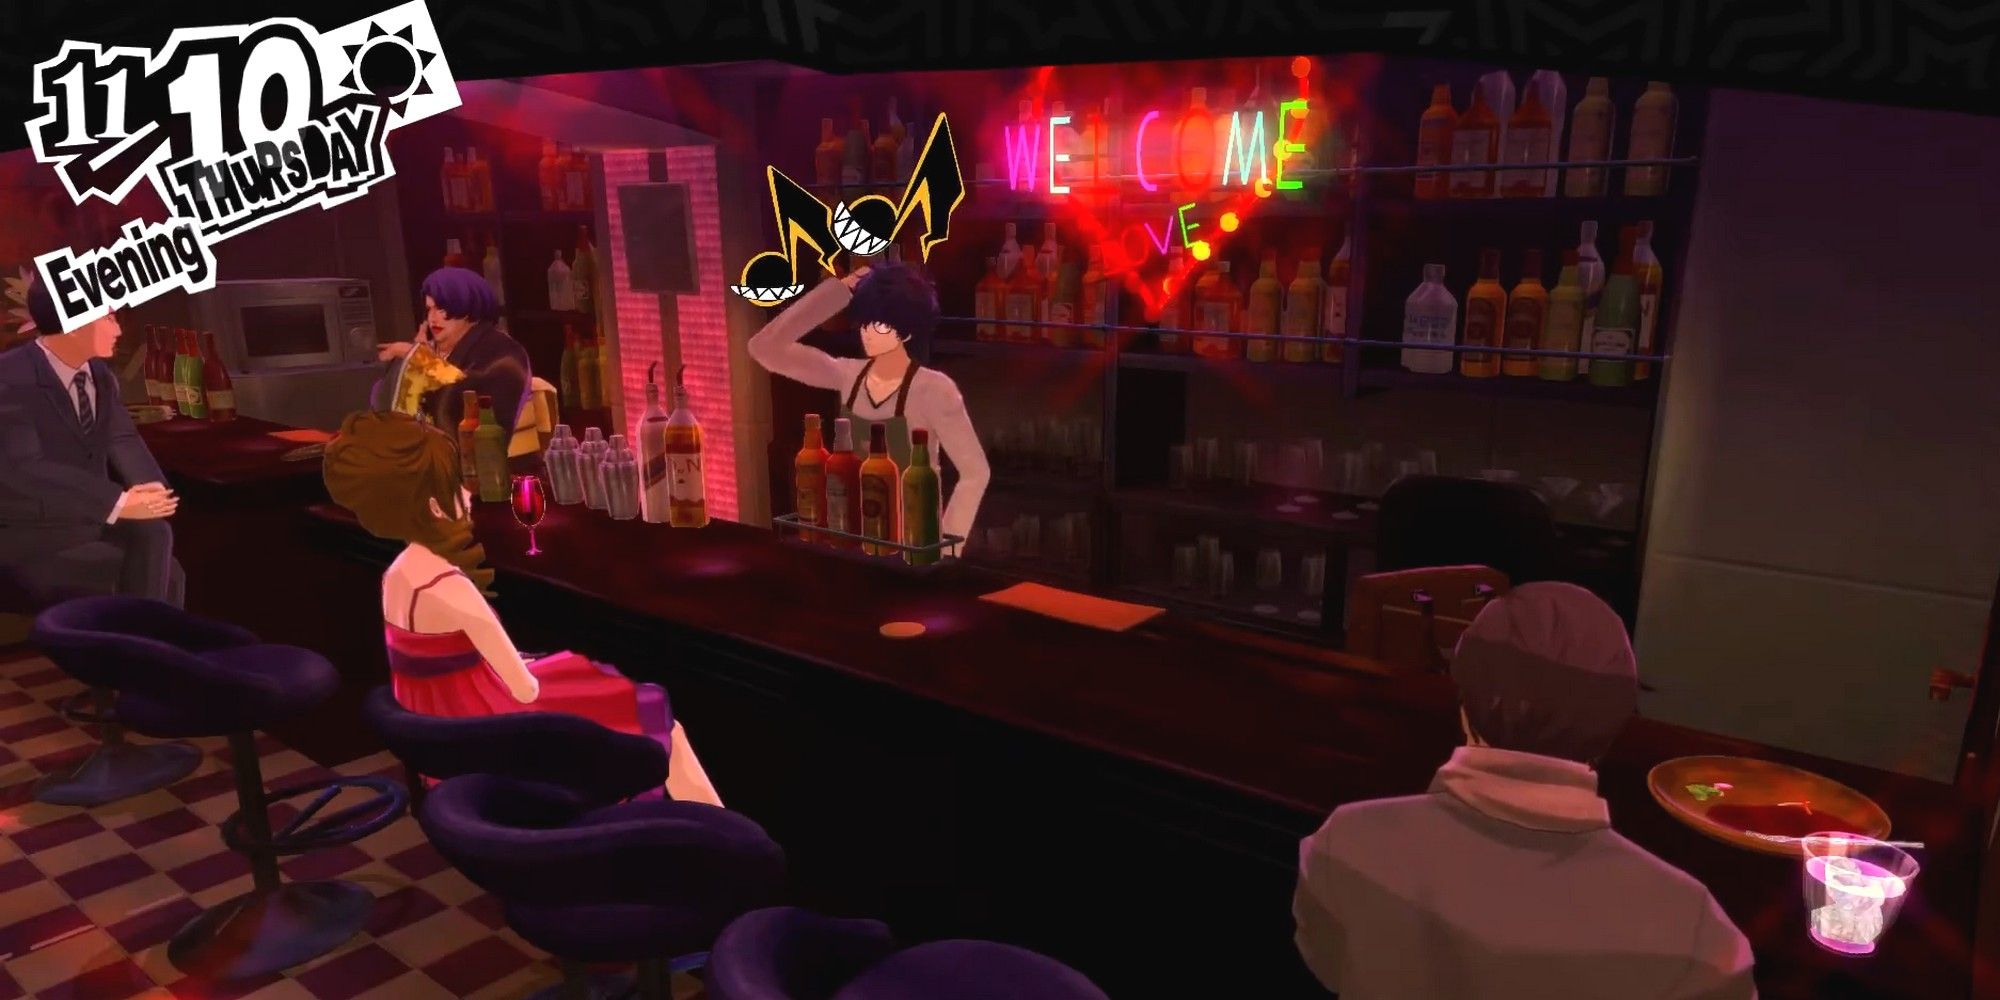 joker behind the bar gaining charm for talking to the woman